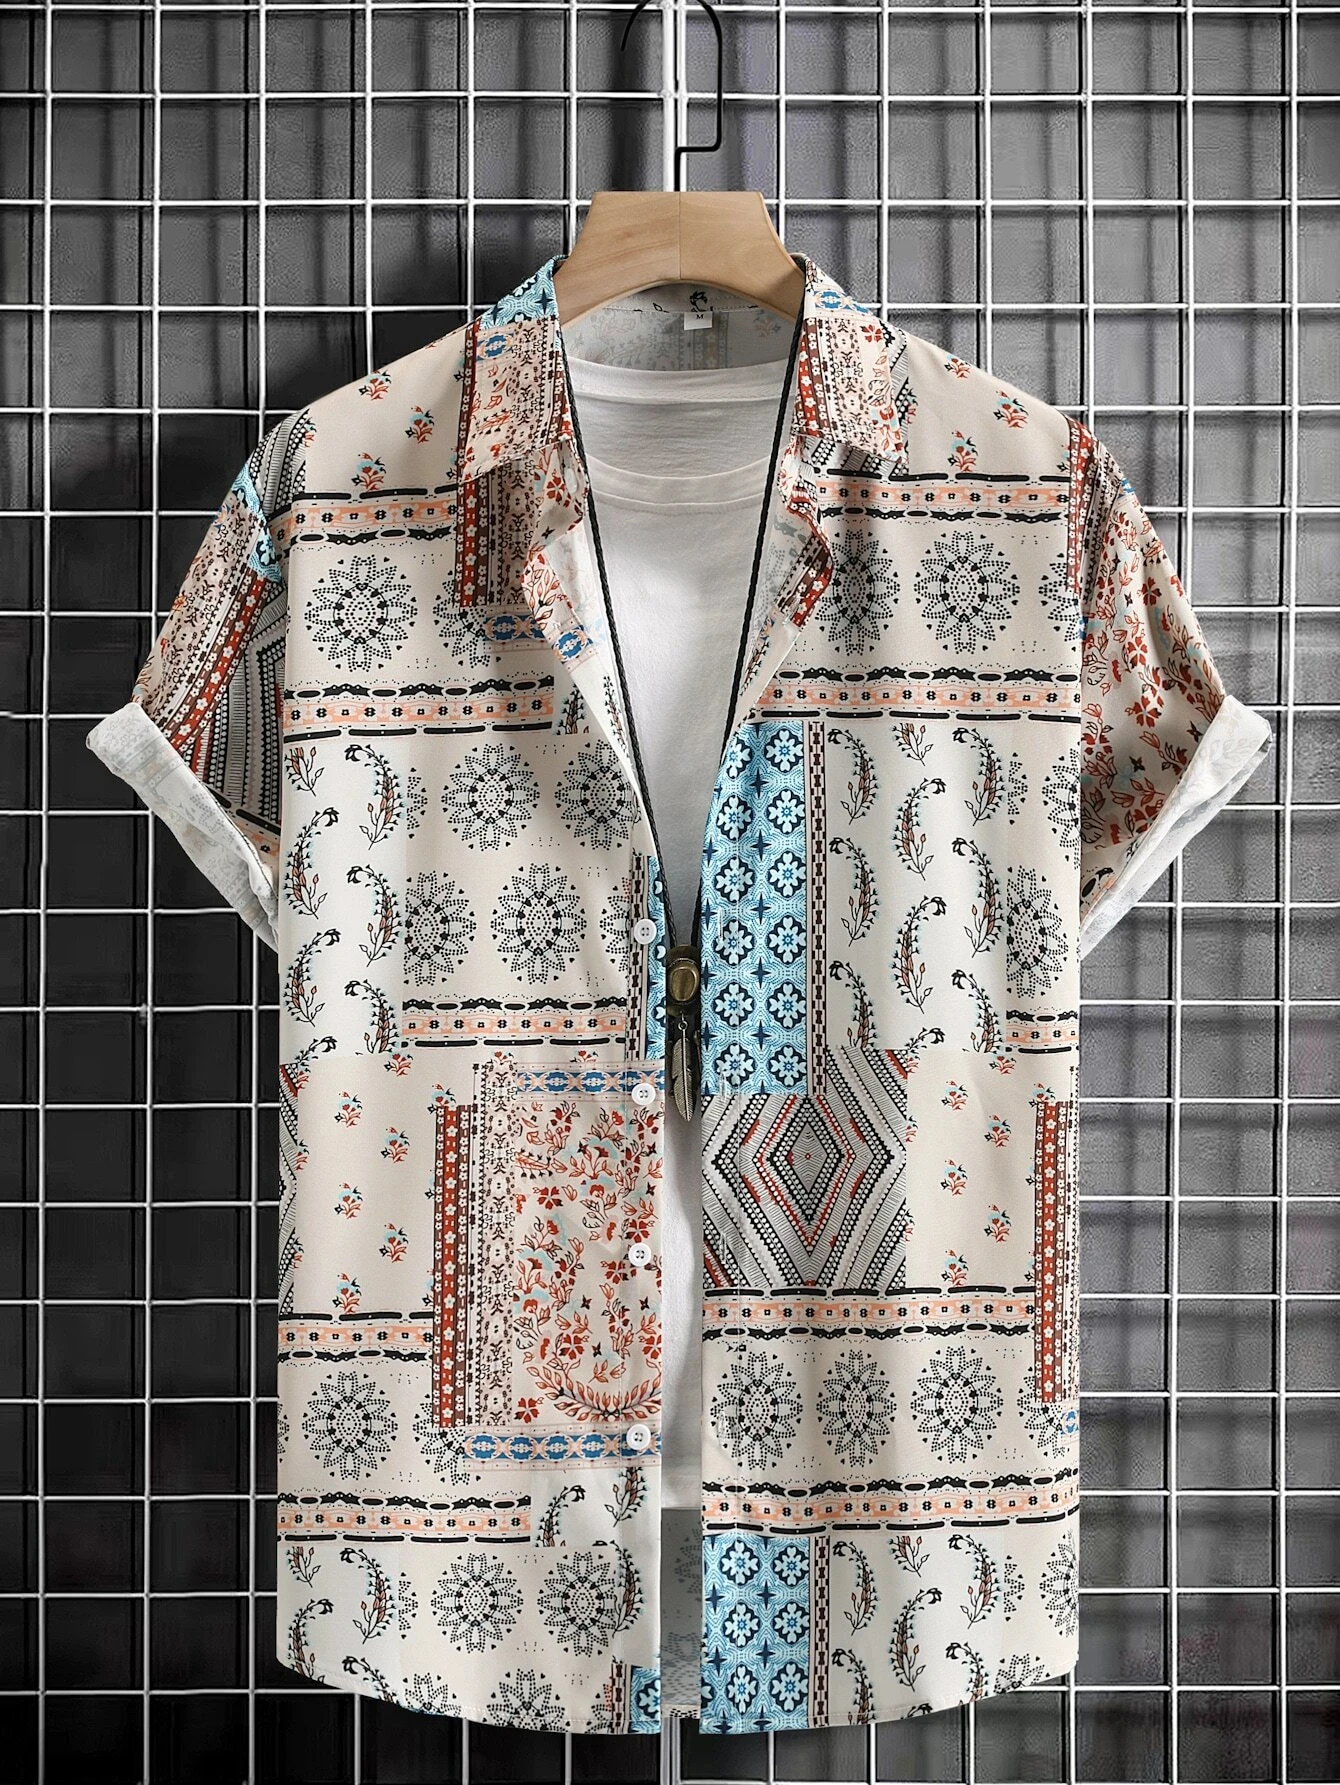 

Men's shirt summer fashion ethnic personalized printed pattern short-sleeved shirt casual button lapel top